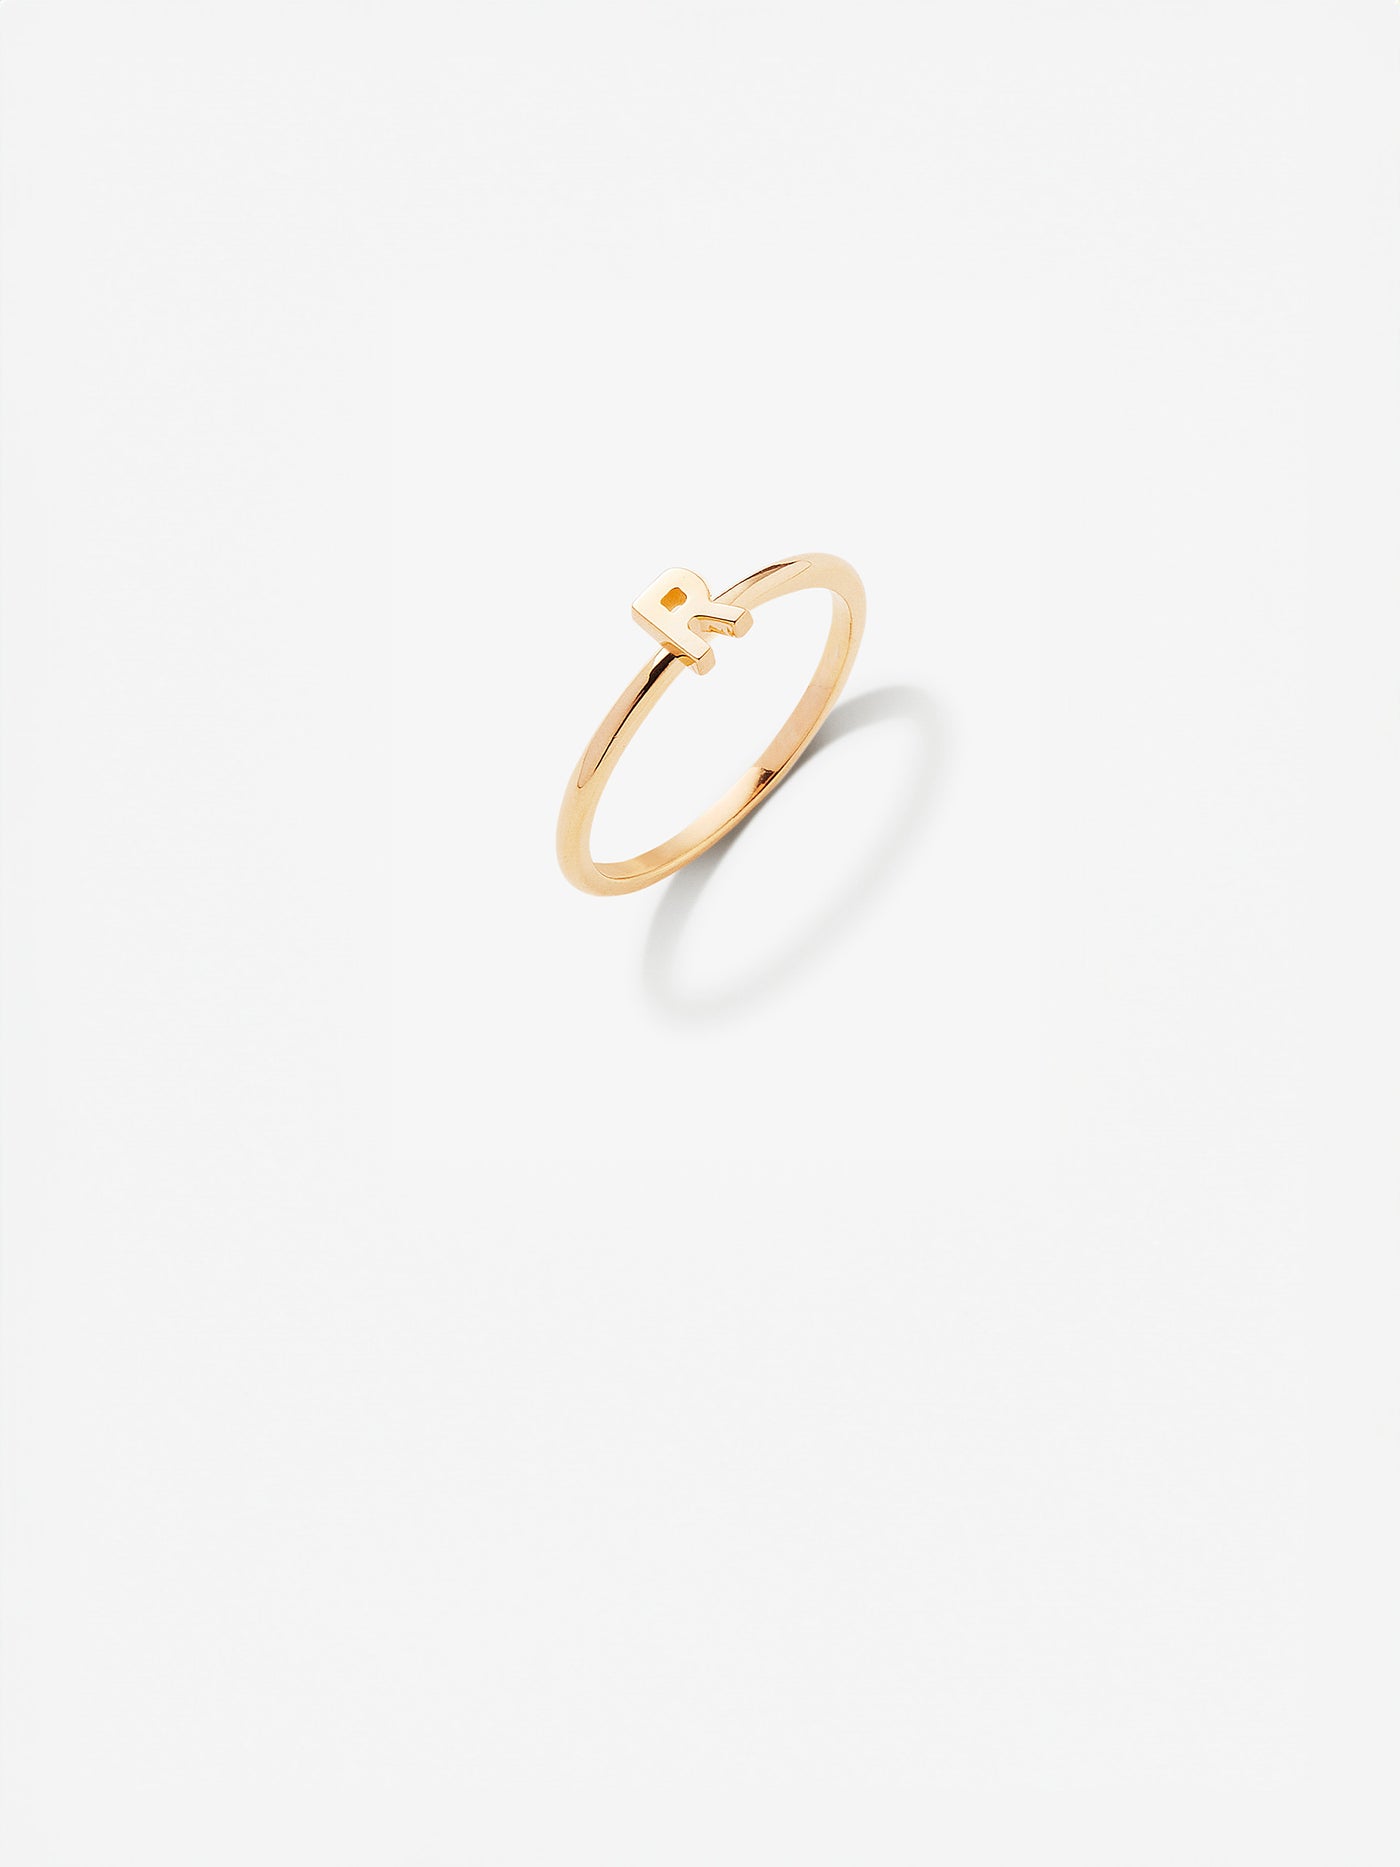 One Letter Stacking Ring in 18k Gold